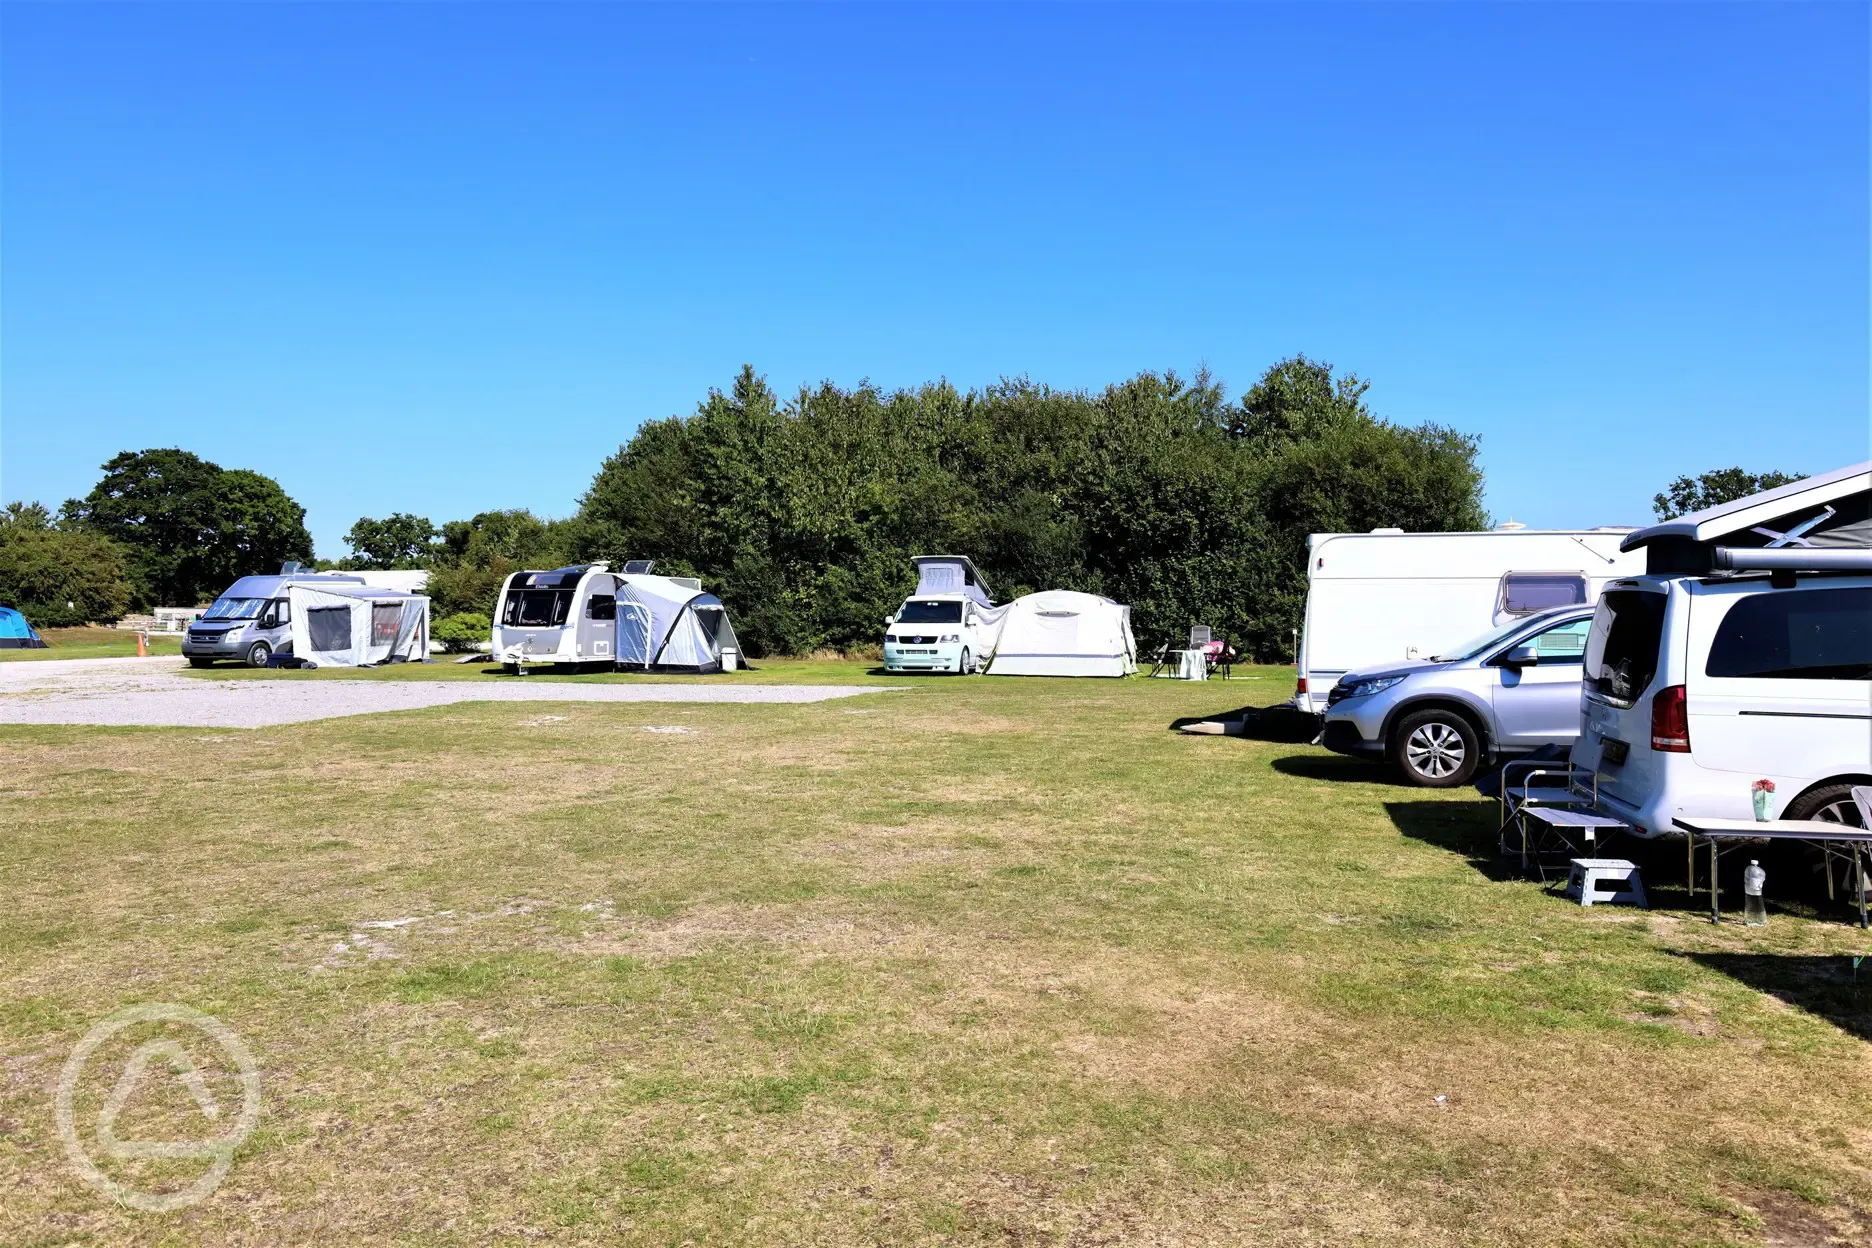 Hardstanding and grass touring pitches